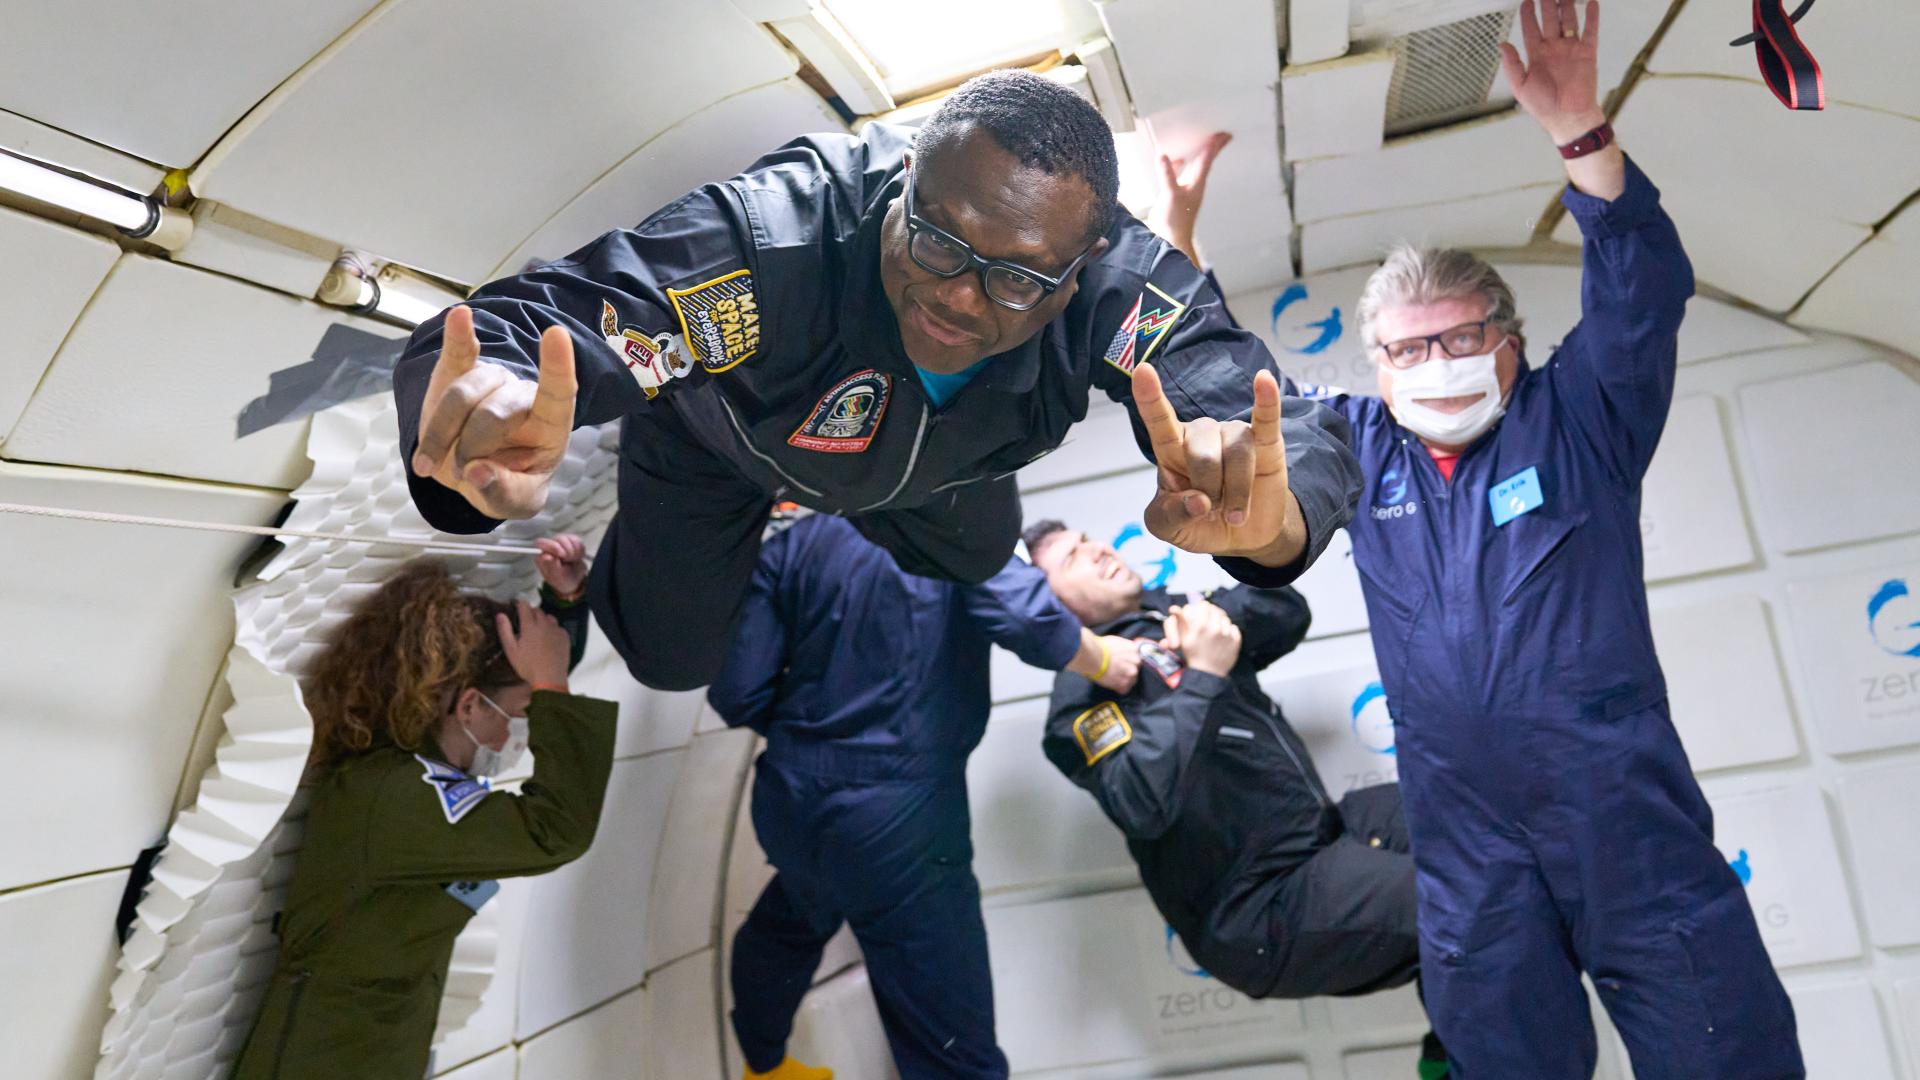 Male space crew members signals his approval (Photo: AstroAccess)